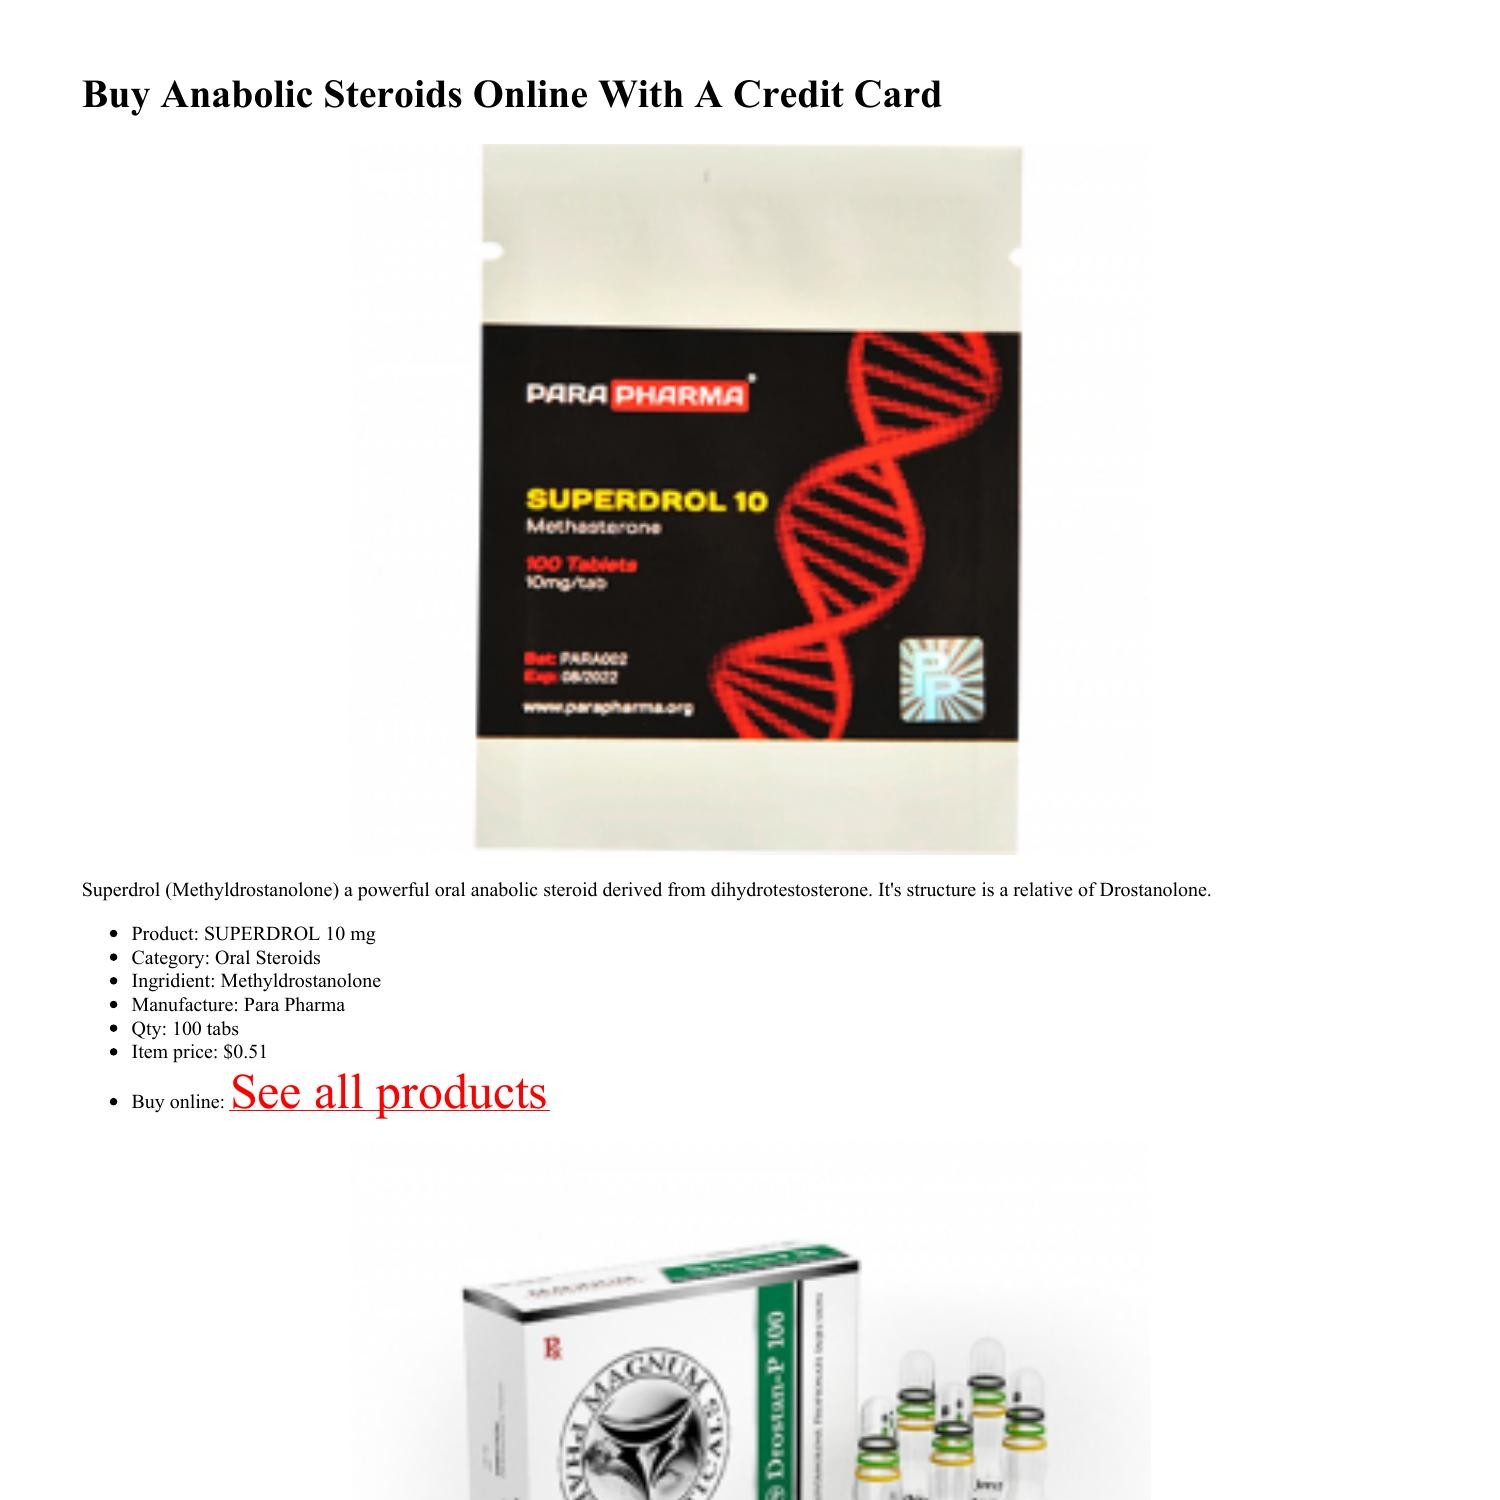 Buy Anabolic Steroids Online With A Credit Card.pdf | DocDroid